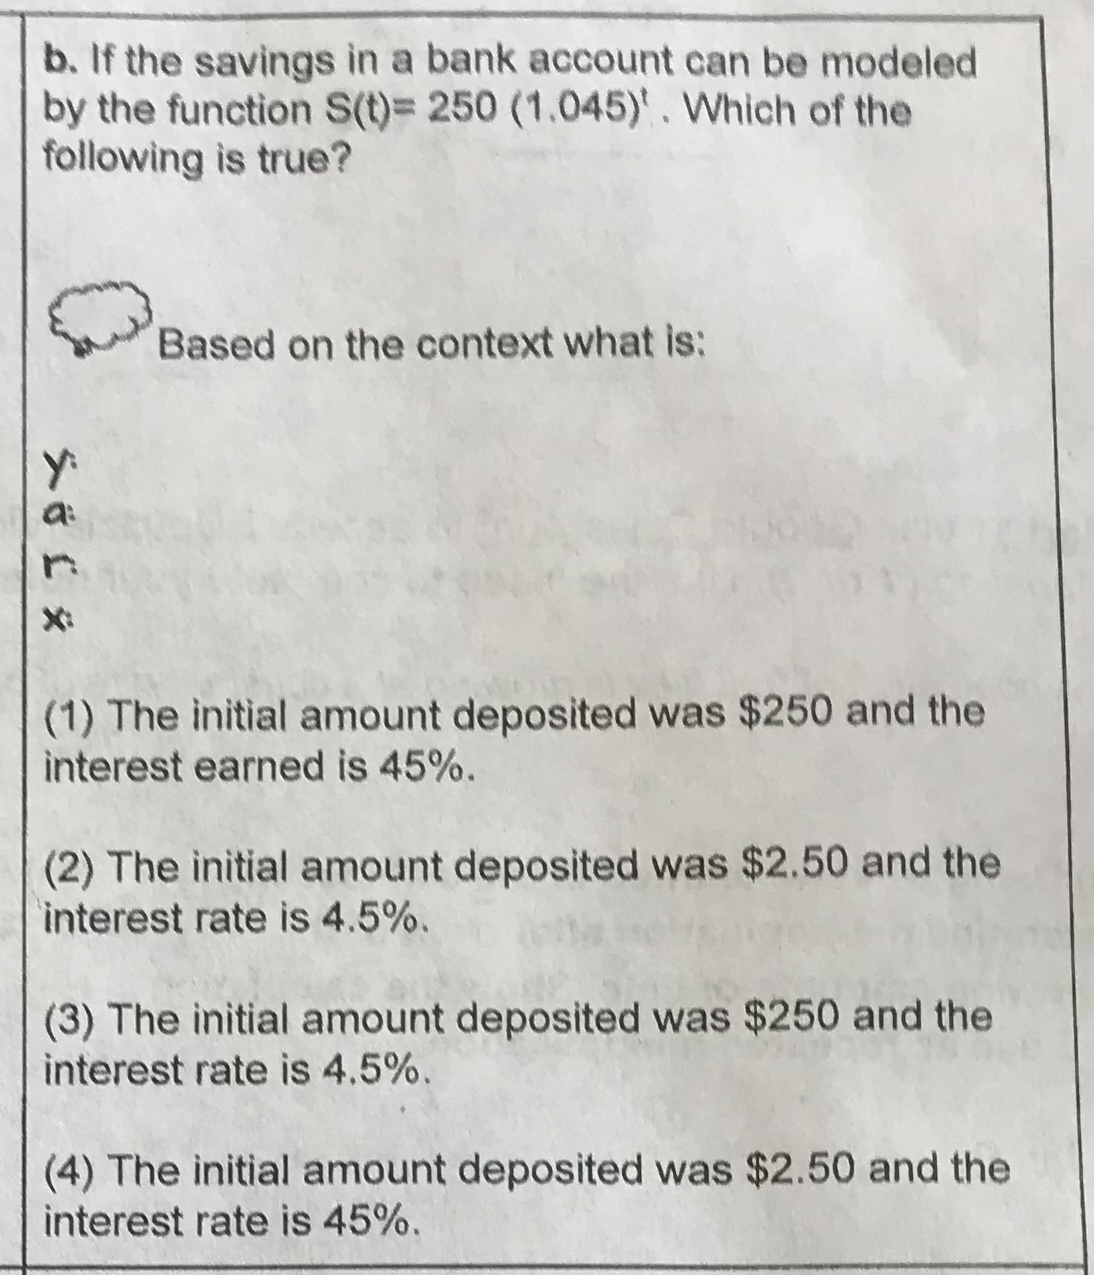 b. If the savings in a bank account can be modeled
by the function S(t) 250 (1.045)'. Which of the
following is true?
Based on the context what is:
X
(1) The initial amount deposited was $250 and the
interest earned is 45%
(2) The initial amount deposited was $2.50 and the
interest rate is 4.5%.
(3) The initial amount deposited was $250 and the
interest rate is 4.5%.
(4) The initial amount deposited was $2.50 and the
interest rate is 45%.
